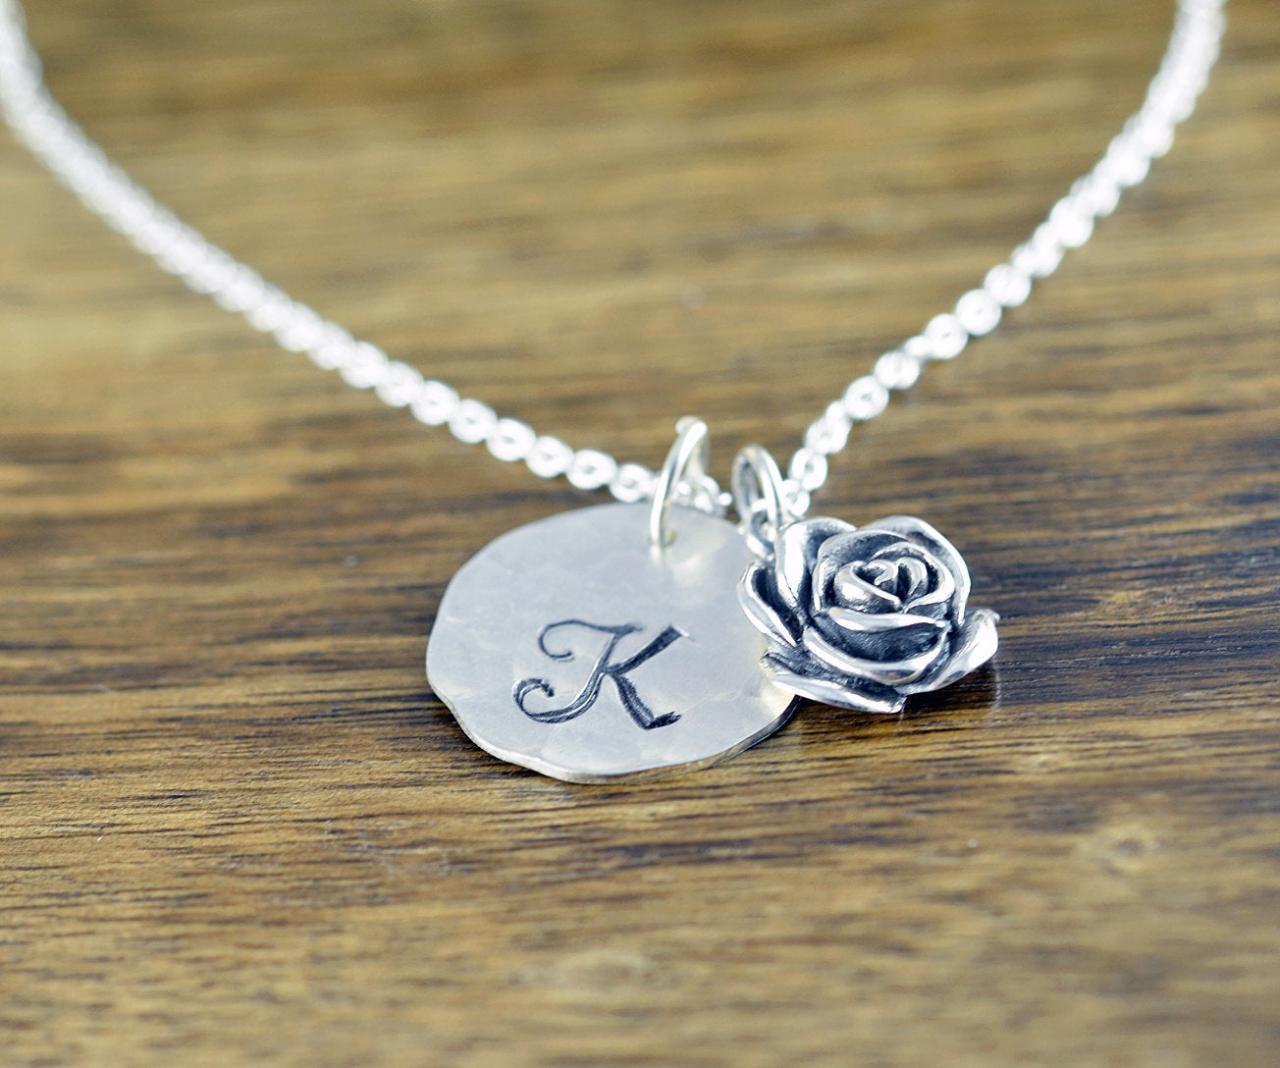 Rose Necklace, Initial Necklace, Hand Stamped, Personalized, Monogram - Rose Flower Necklace - Flower Jewelry -